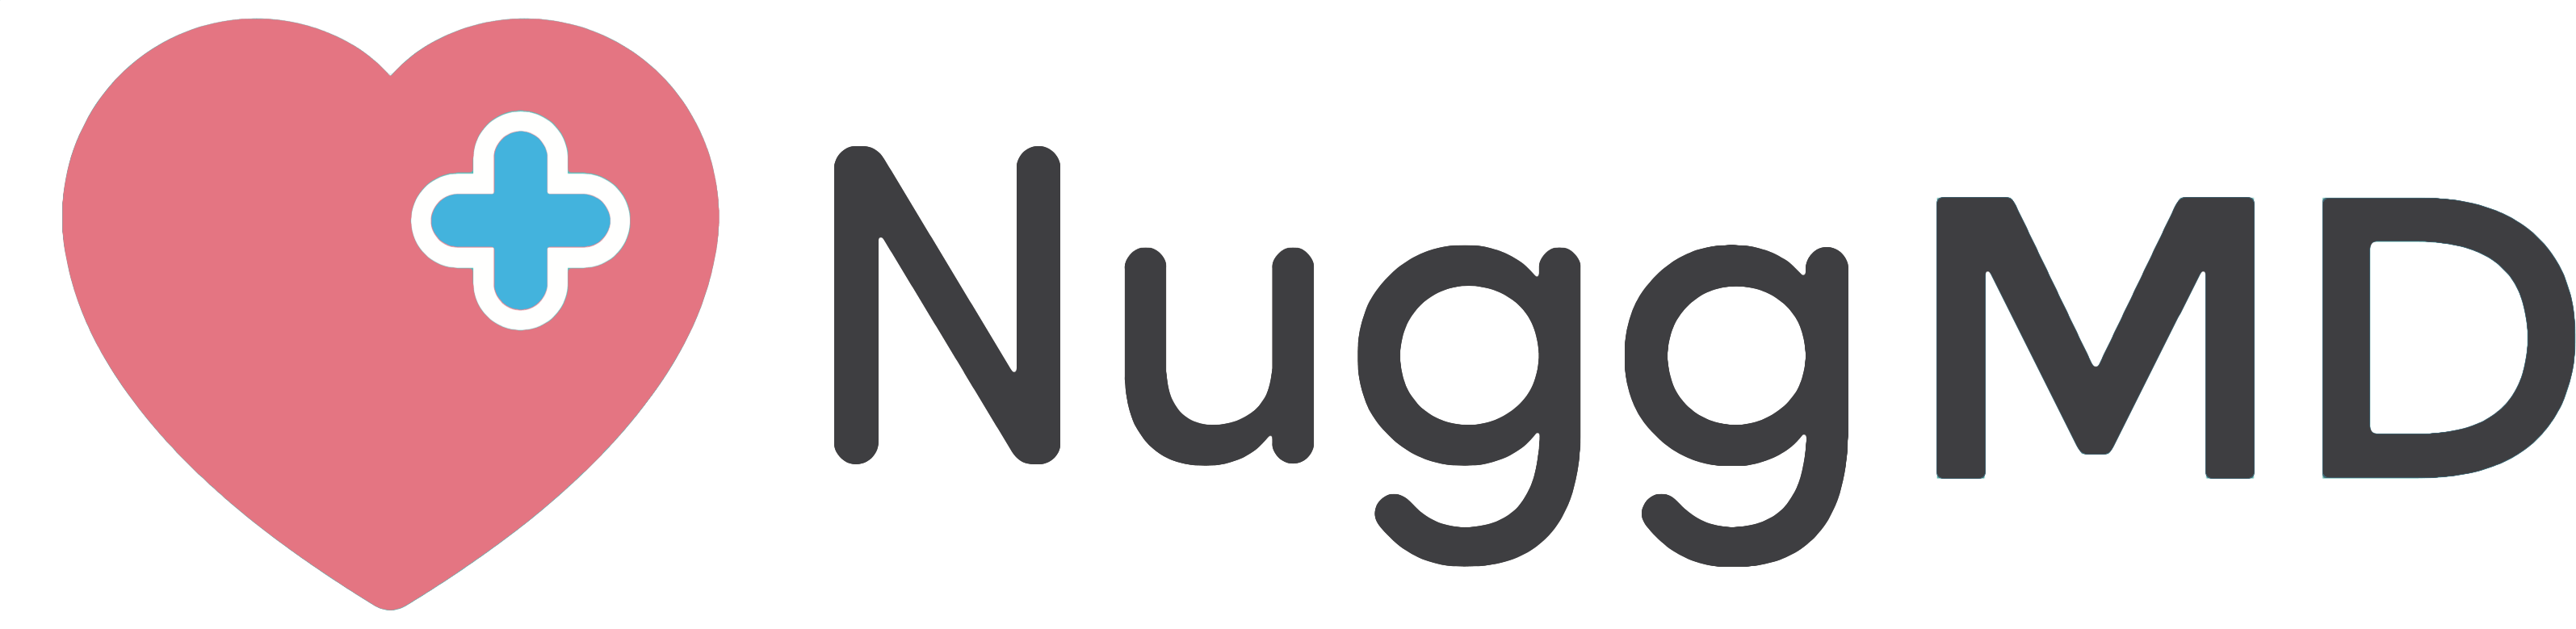 logo for nugg m.d.